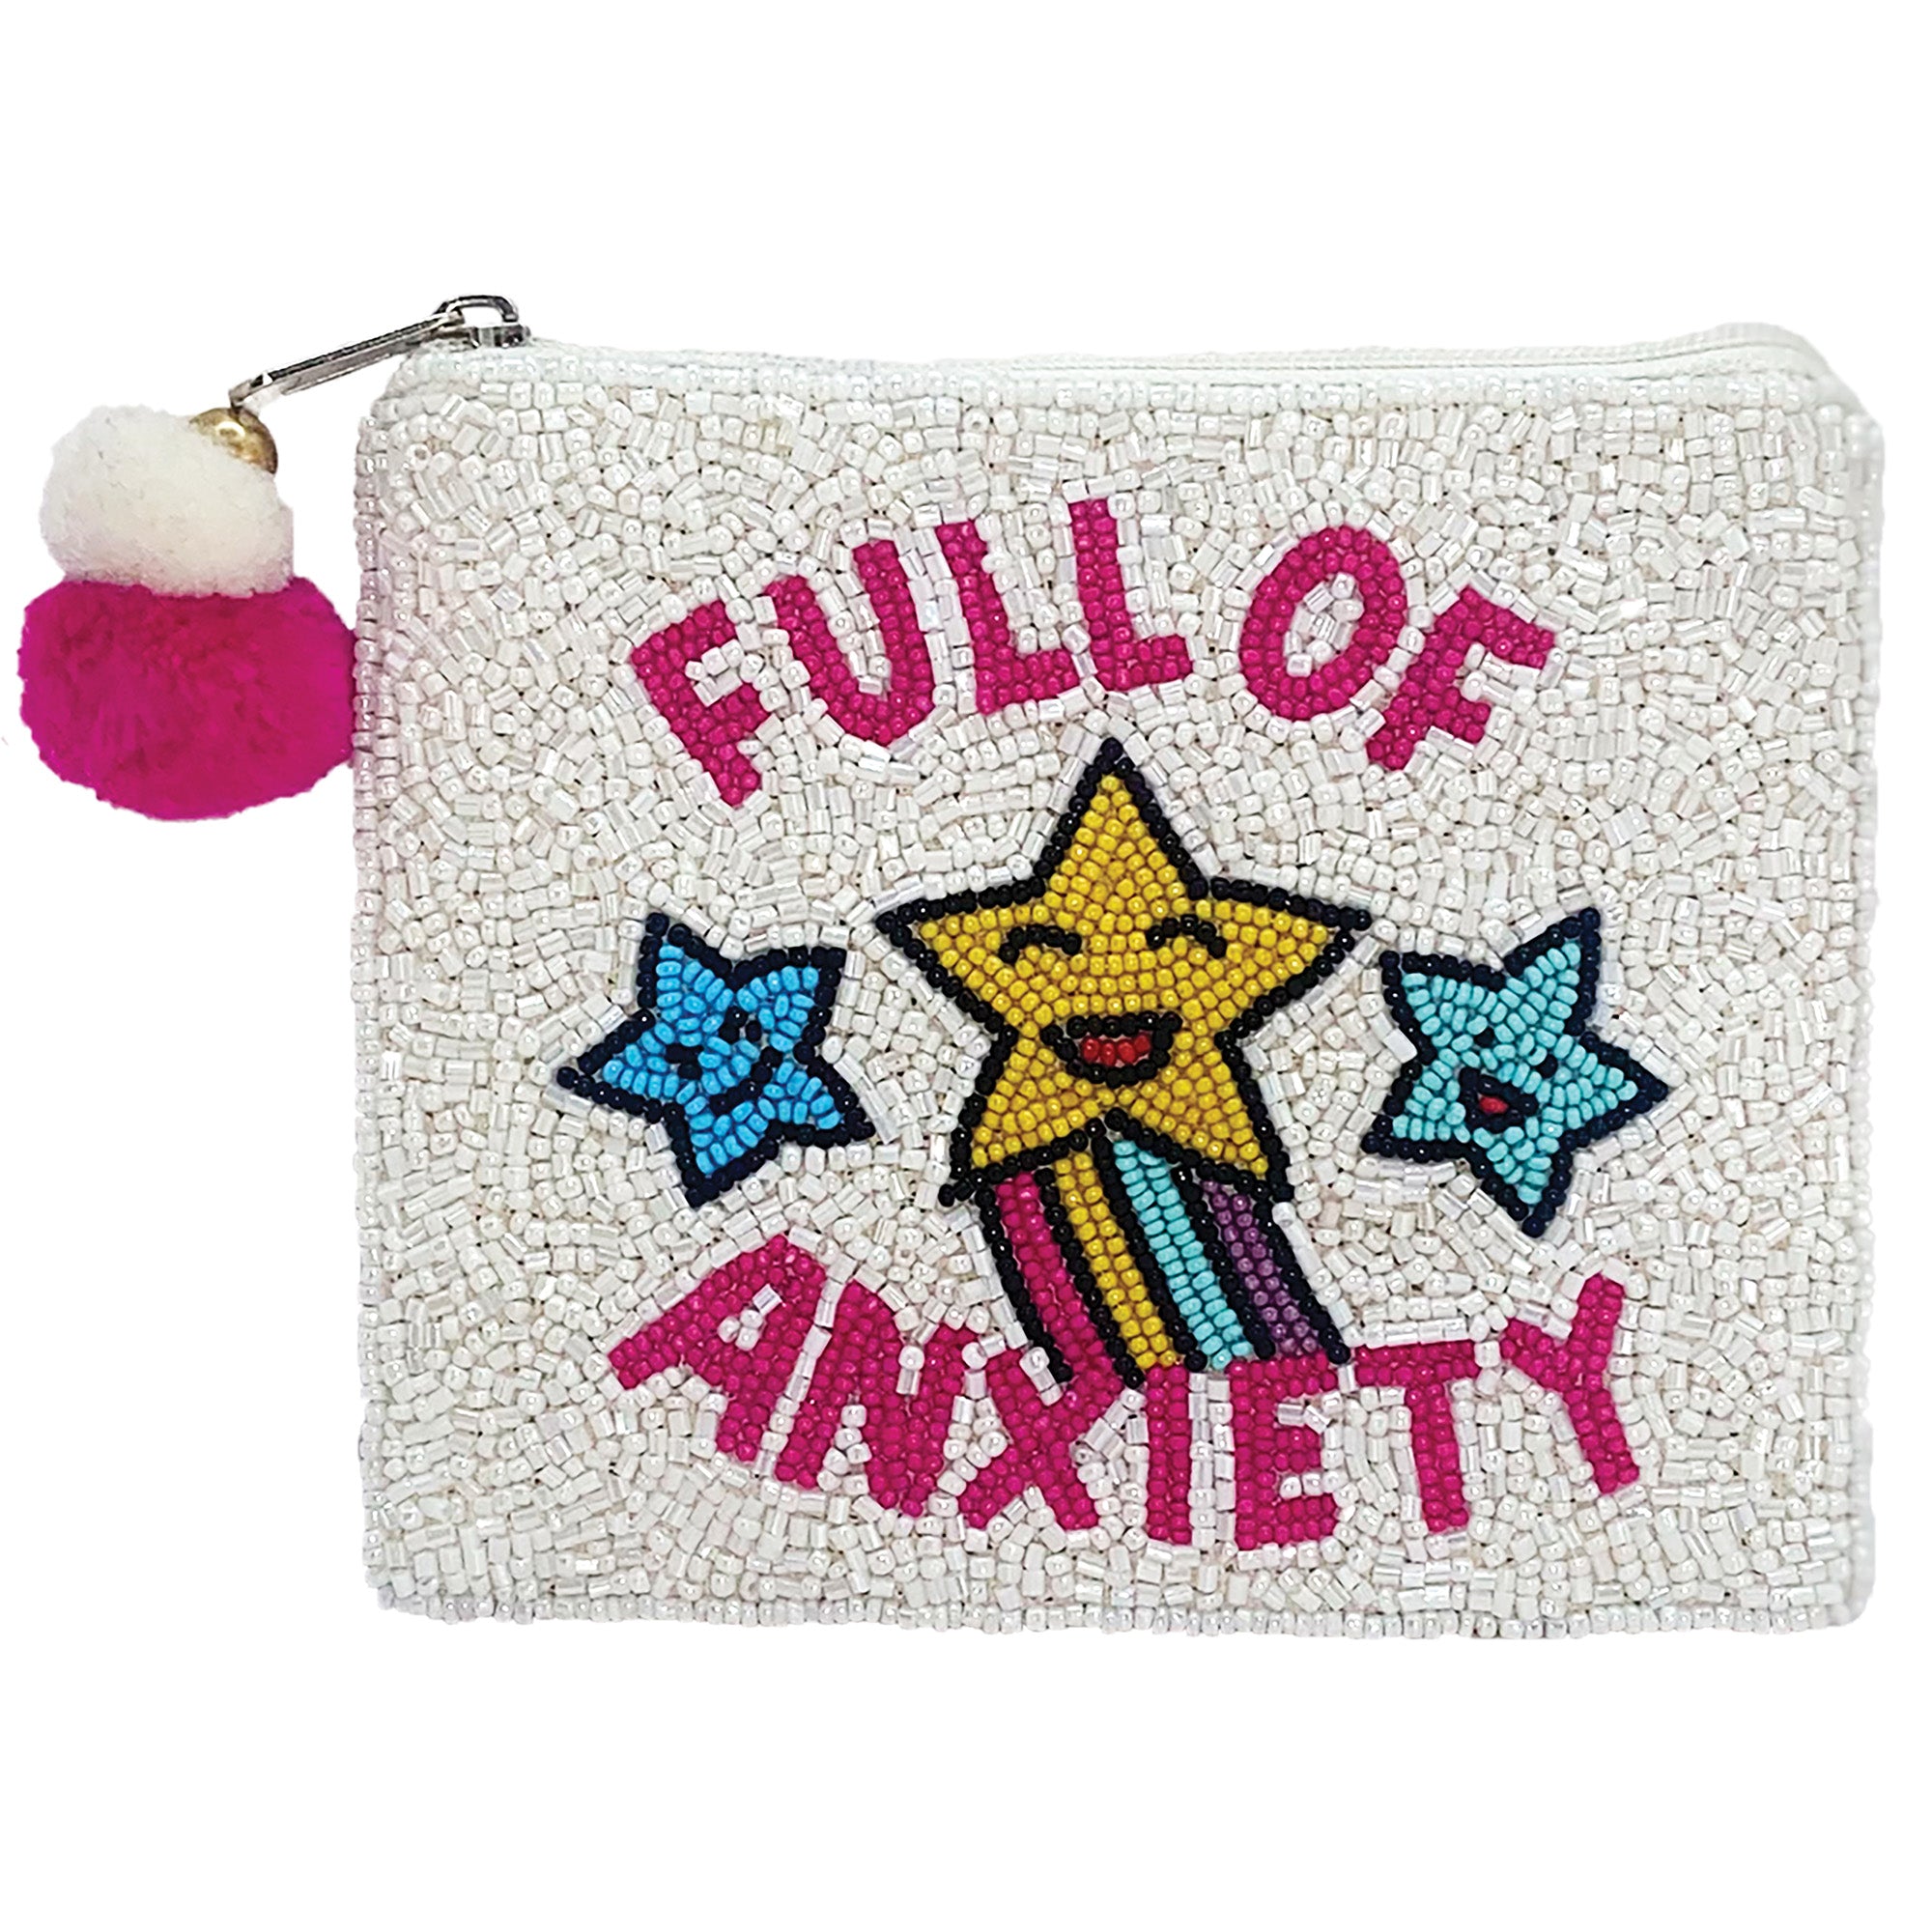 LA CHIC FULL OF ANXIETY BEADED POUCH